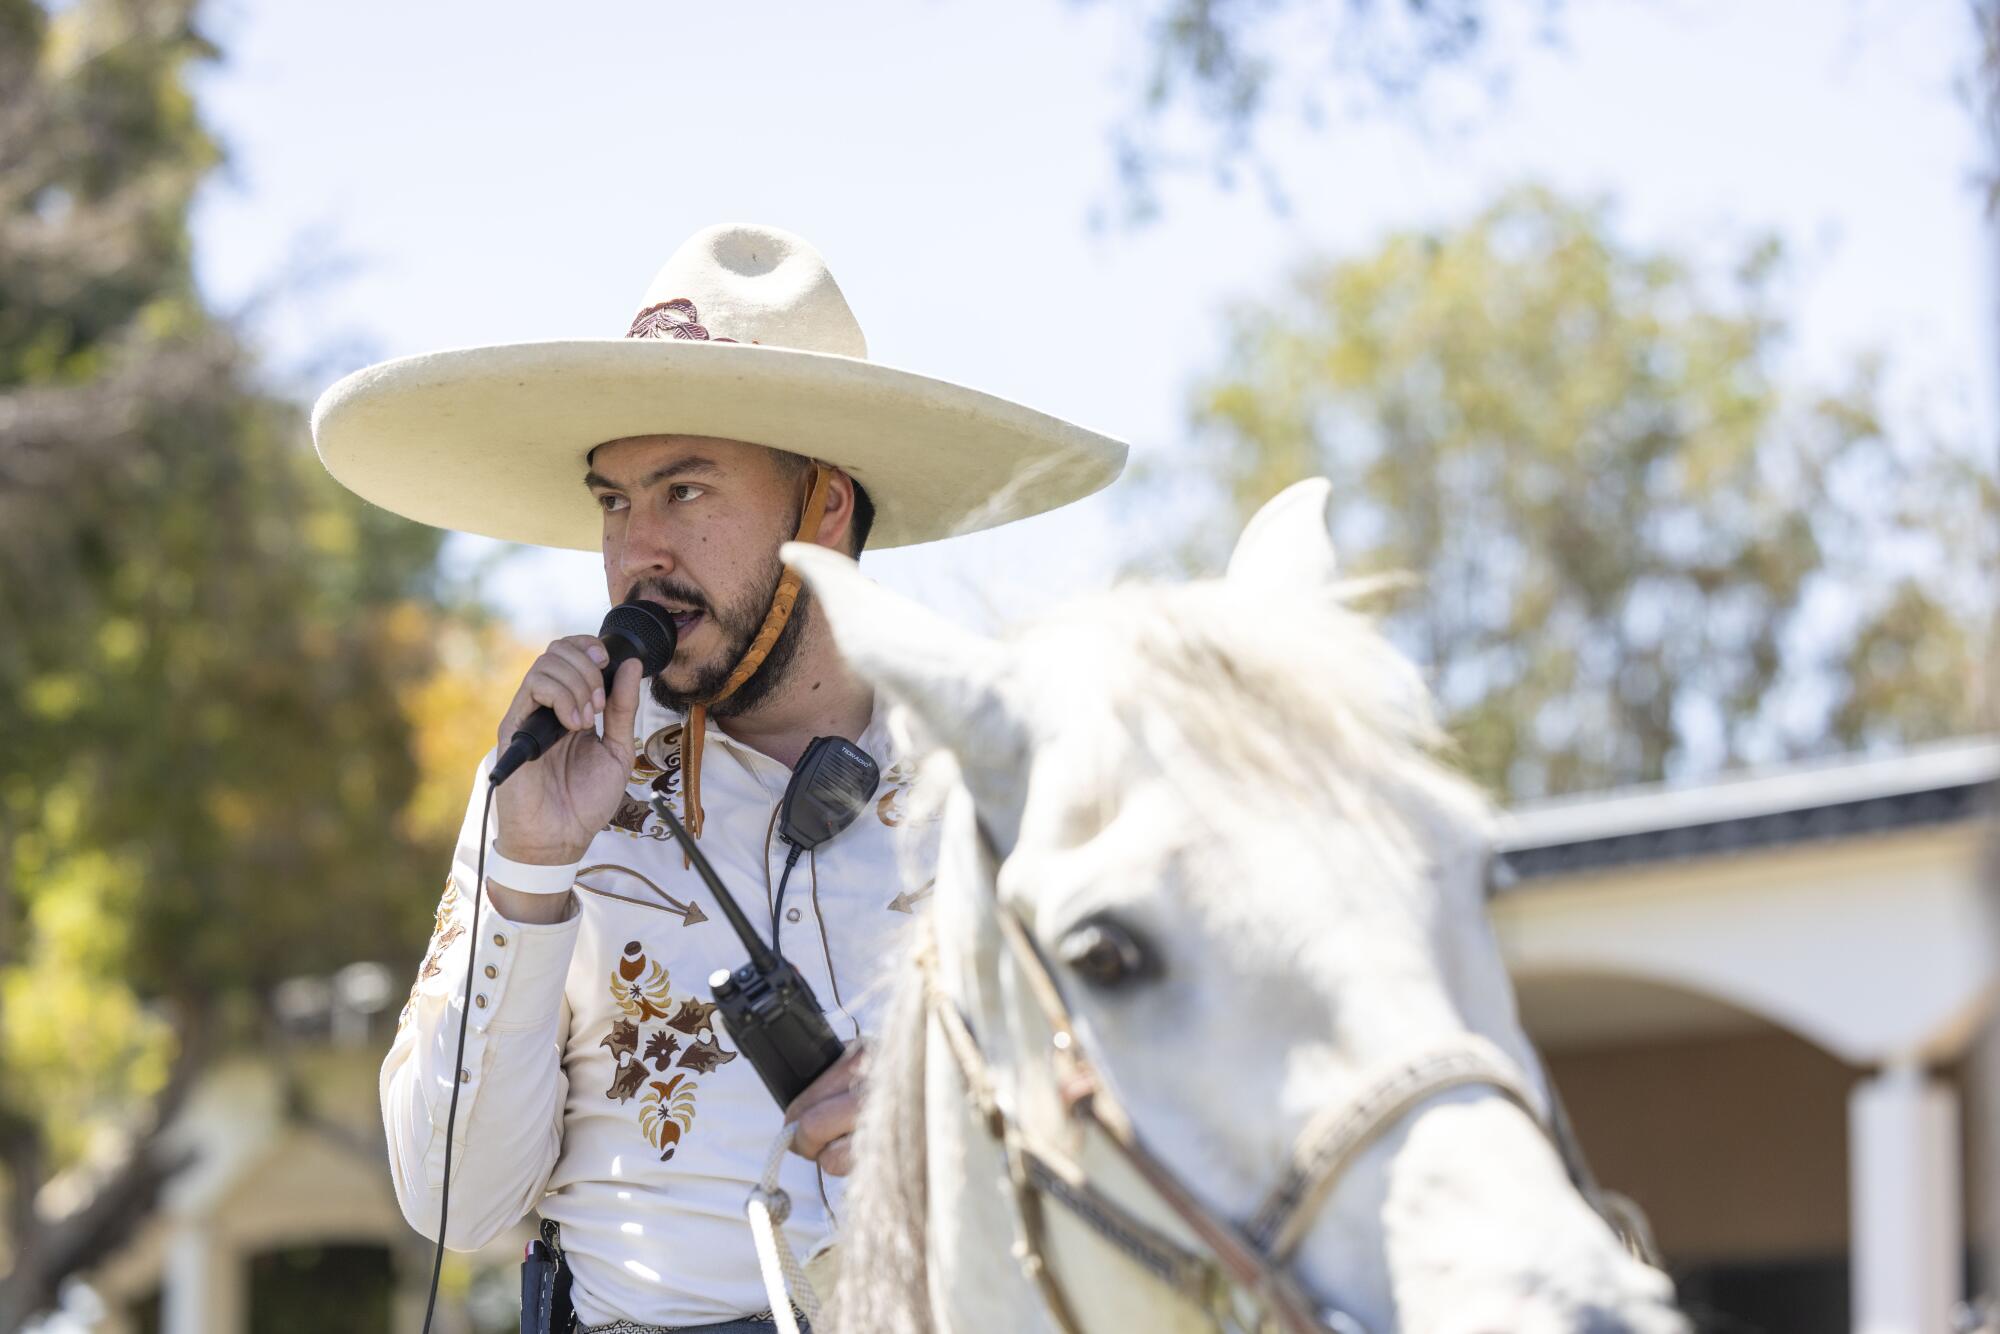 A man in a sombrero who is riding a horse speaks into a microphone